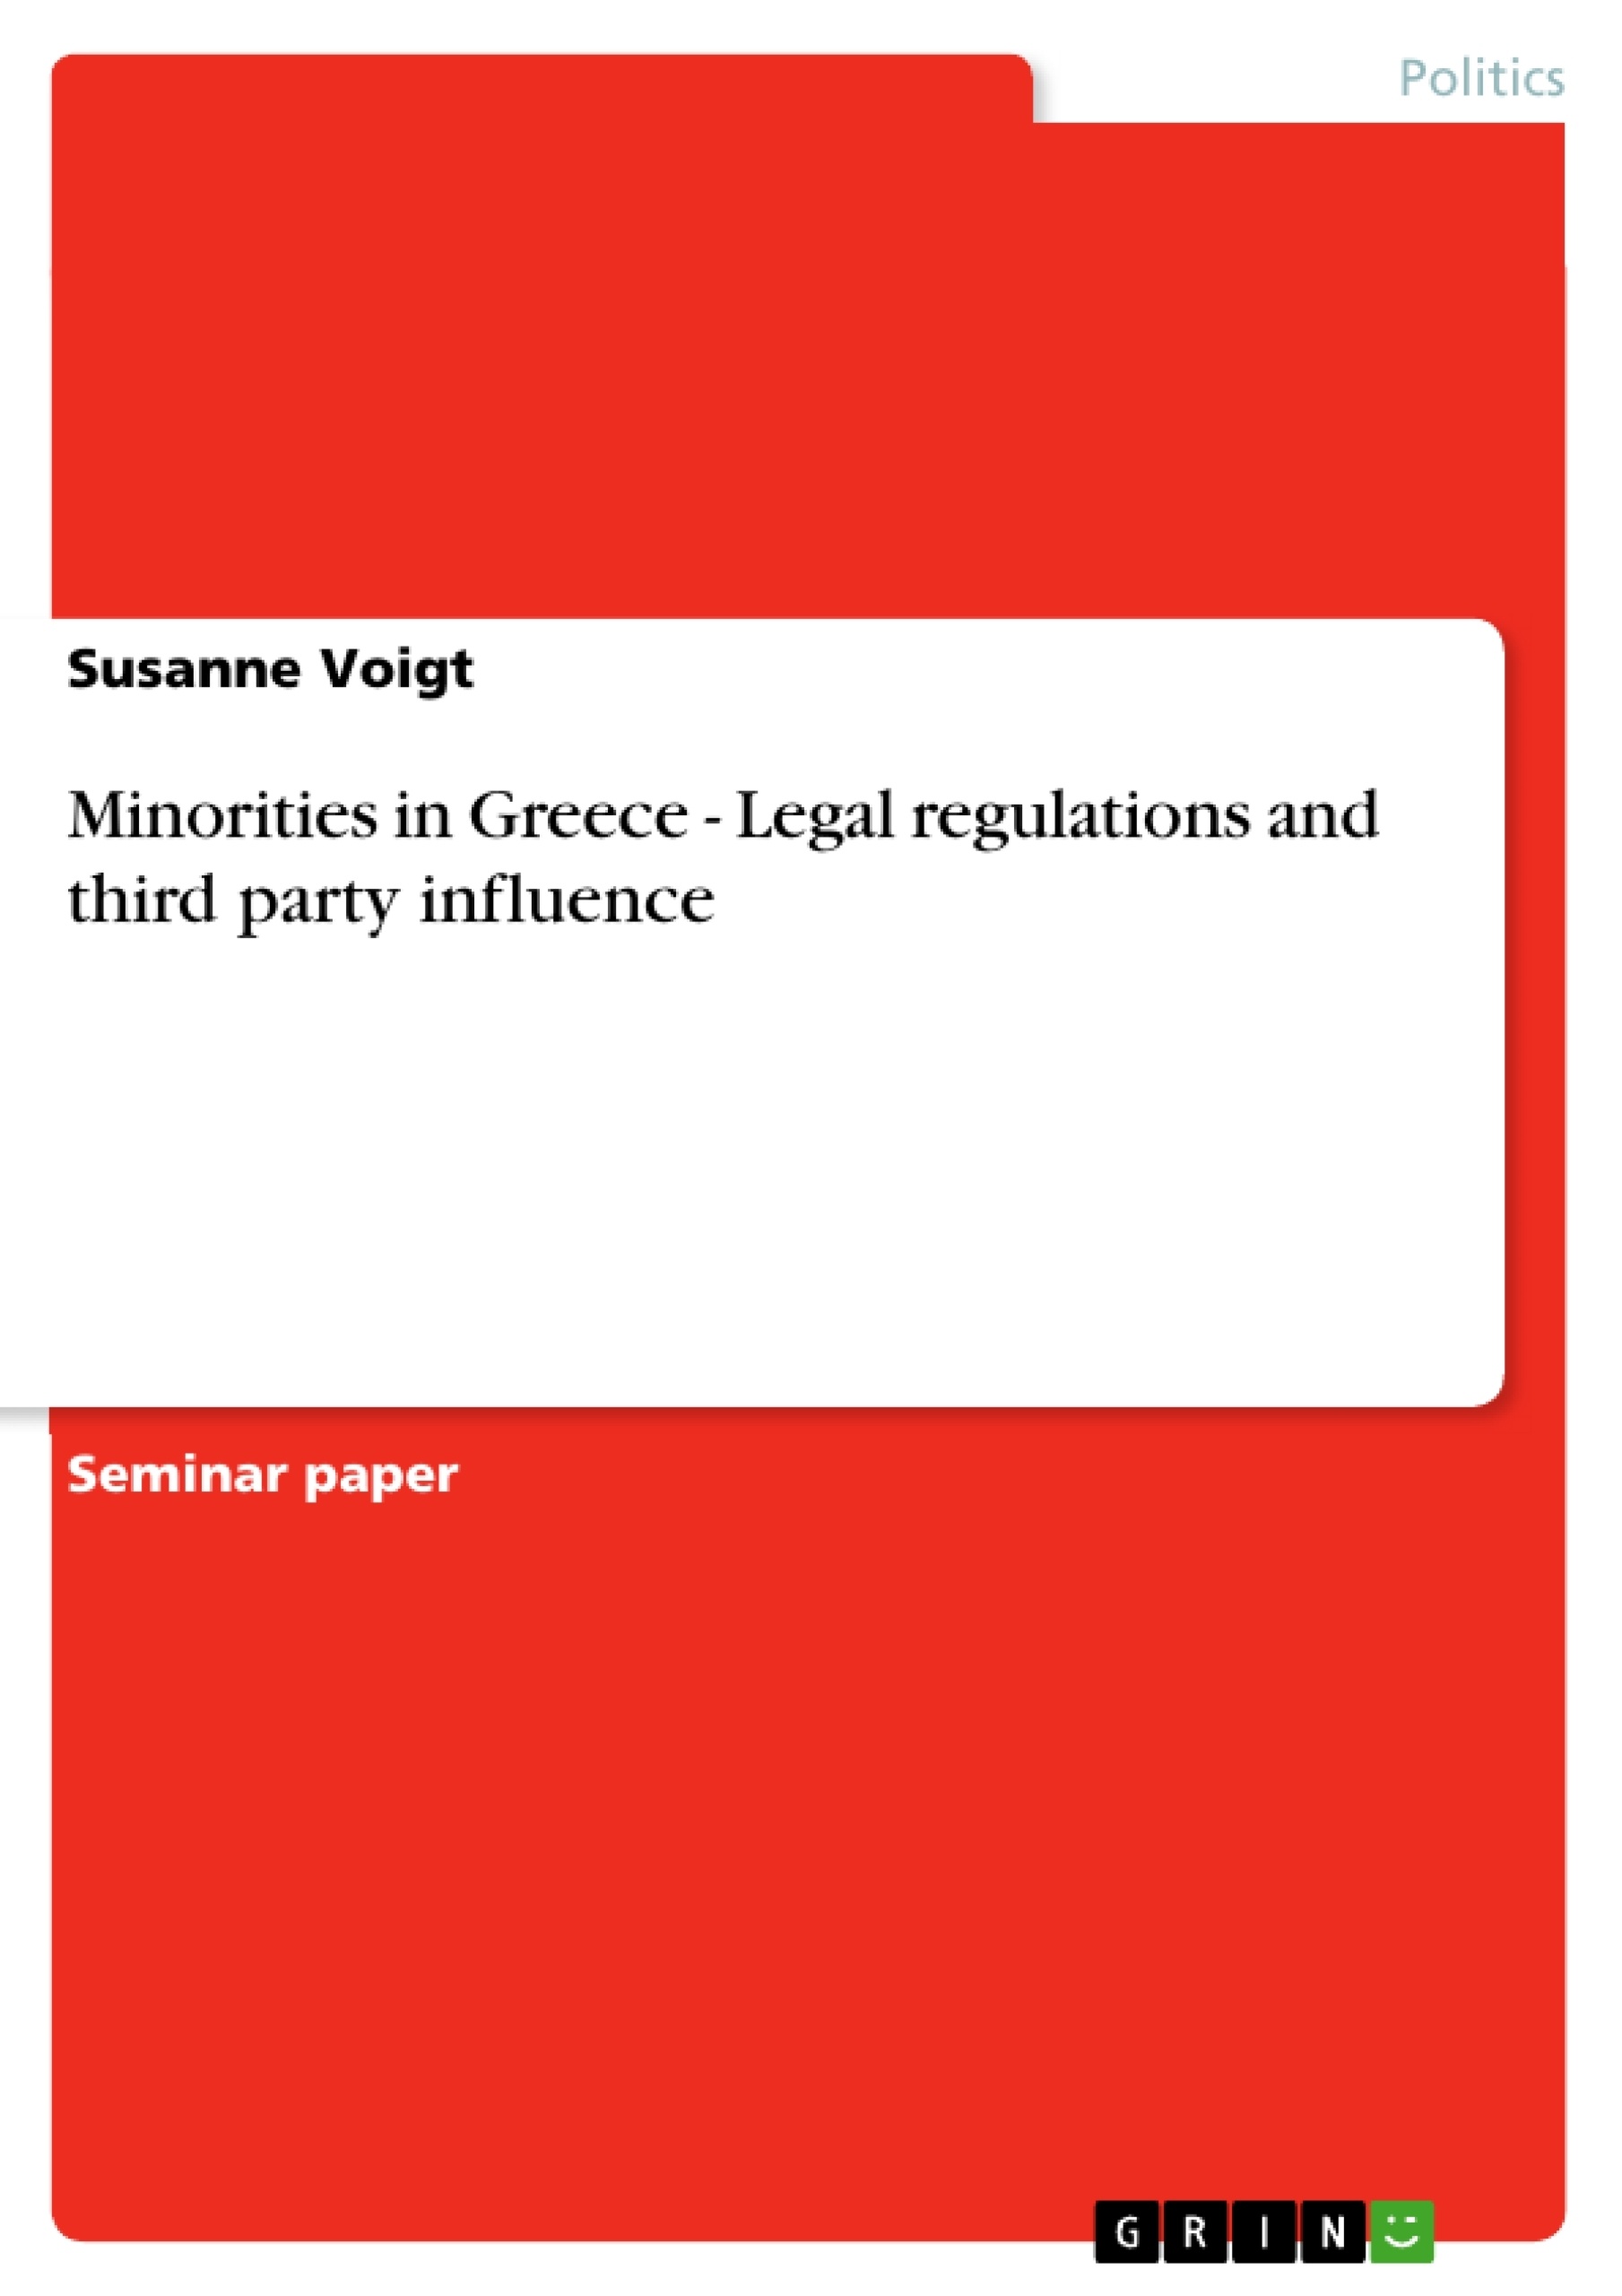 Titel: Minorities in Greece - Legal regulations and third party influence	